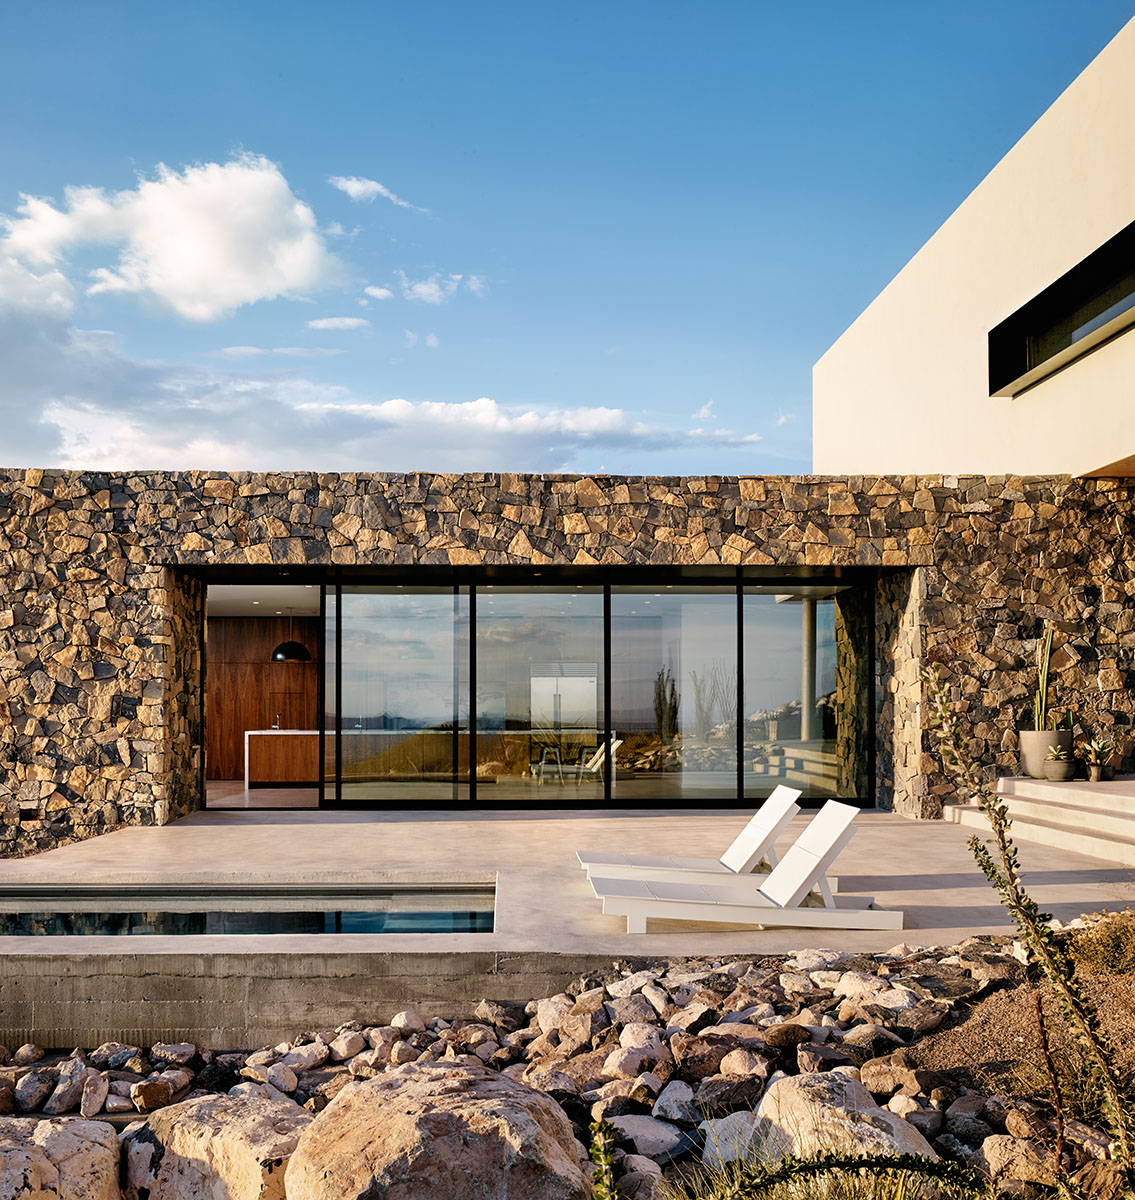 When the massive west-facing multi-slide door is open, cool Texas breezes course through the home's main volume.